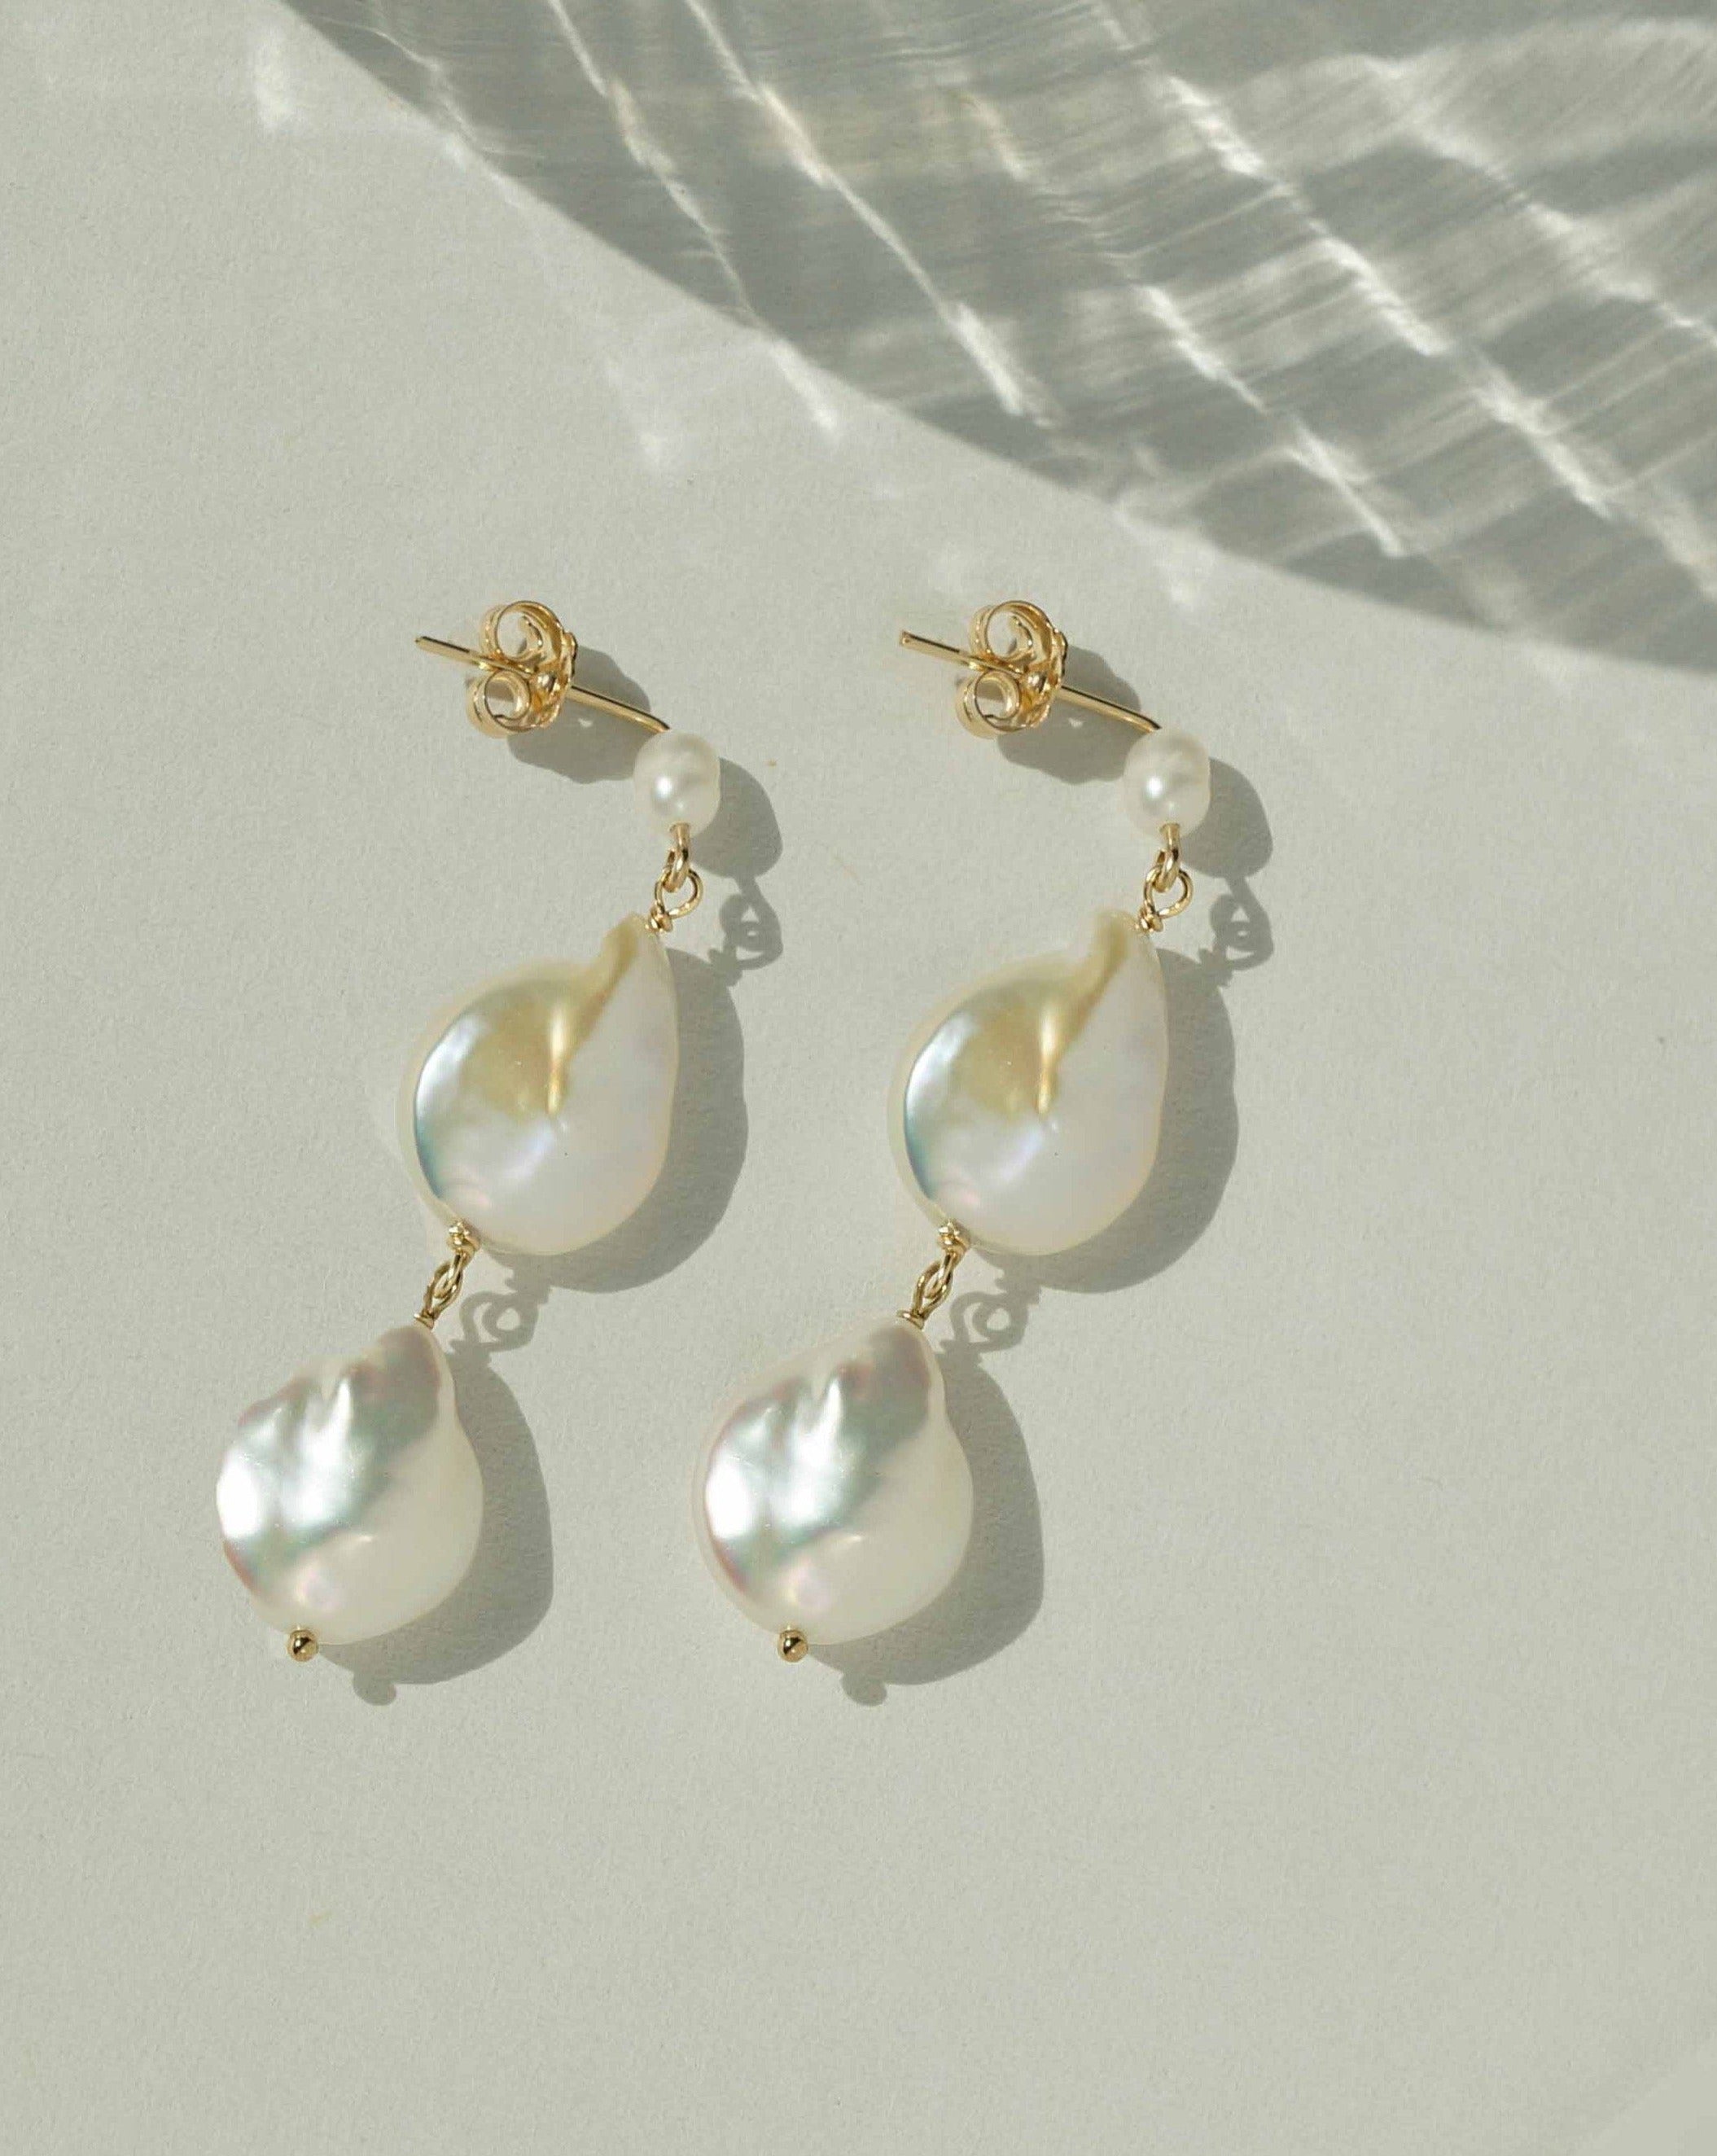 Caro Earrings by KOZAKH. Dangling earrings in 14K Gold Filled with an earring drop length of 2 inches, featuring Freshwater Baroque Pearls.